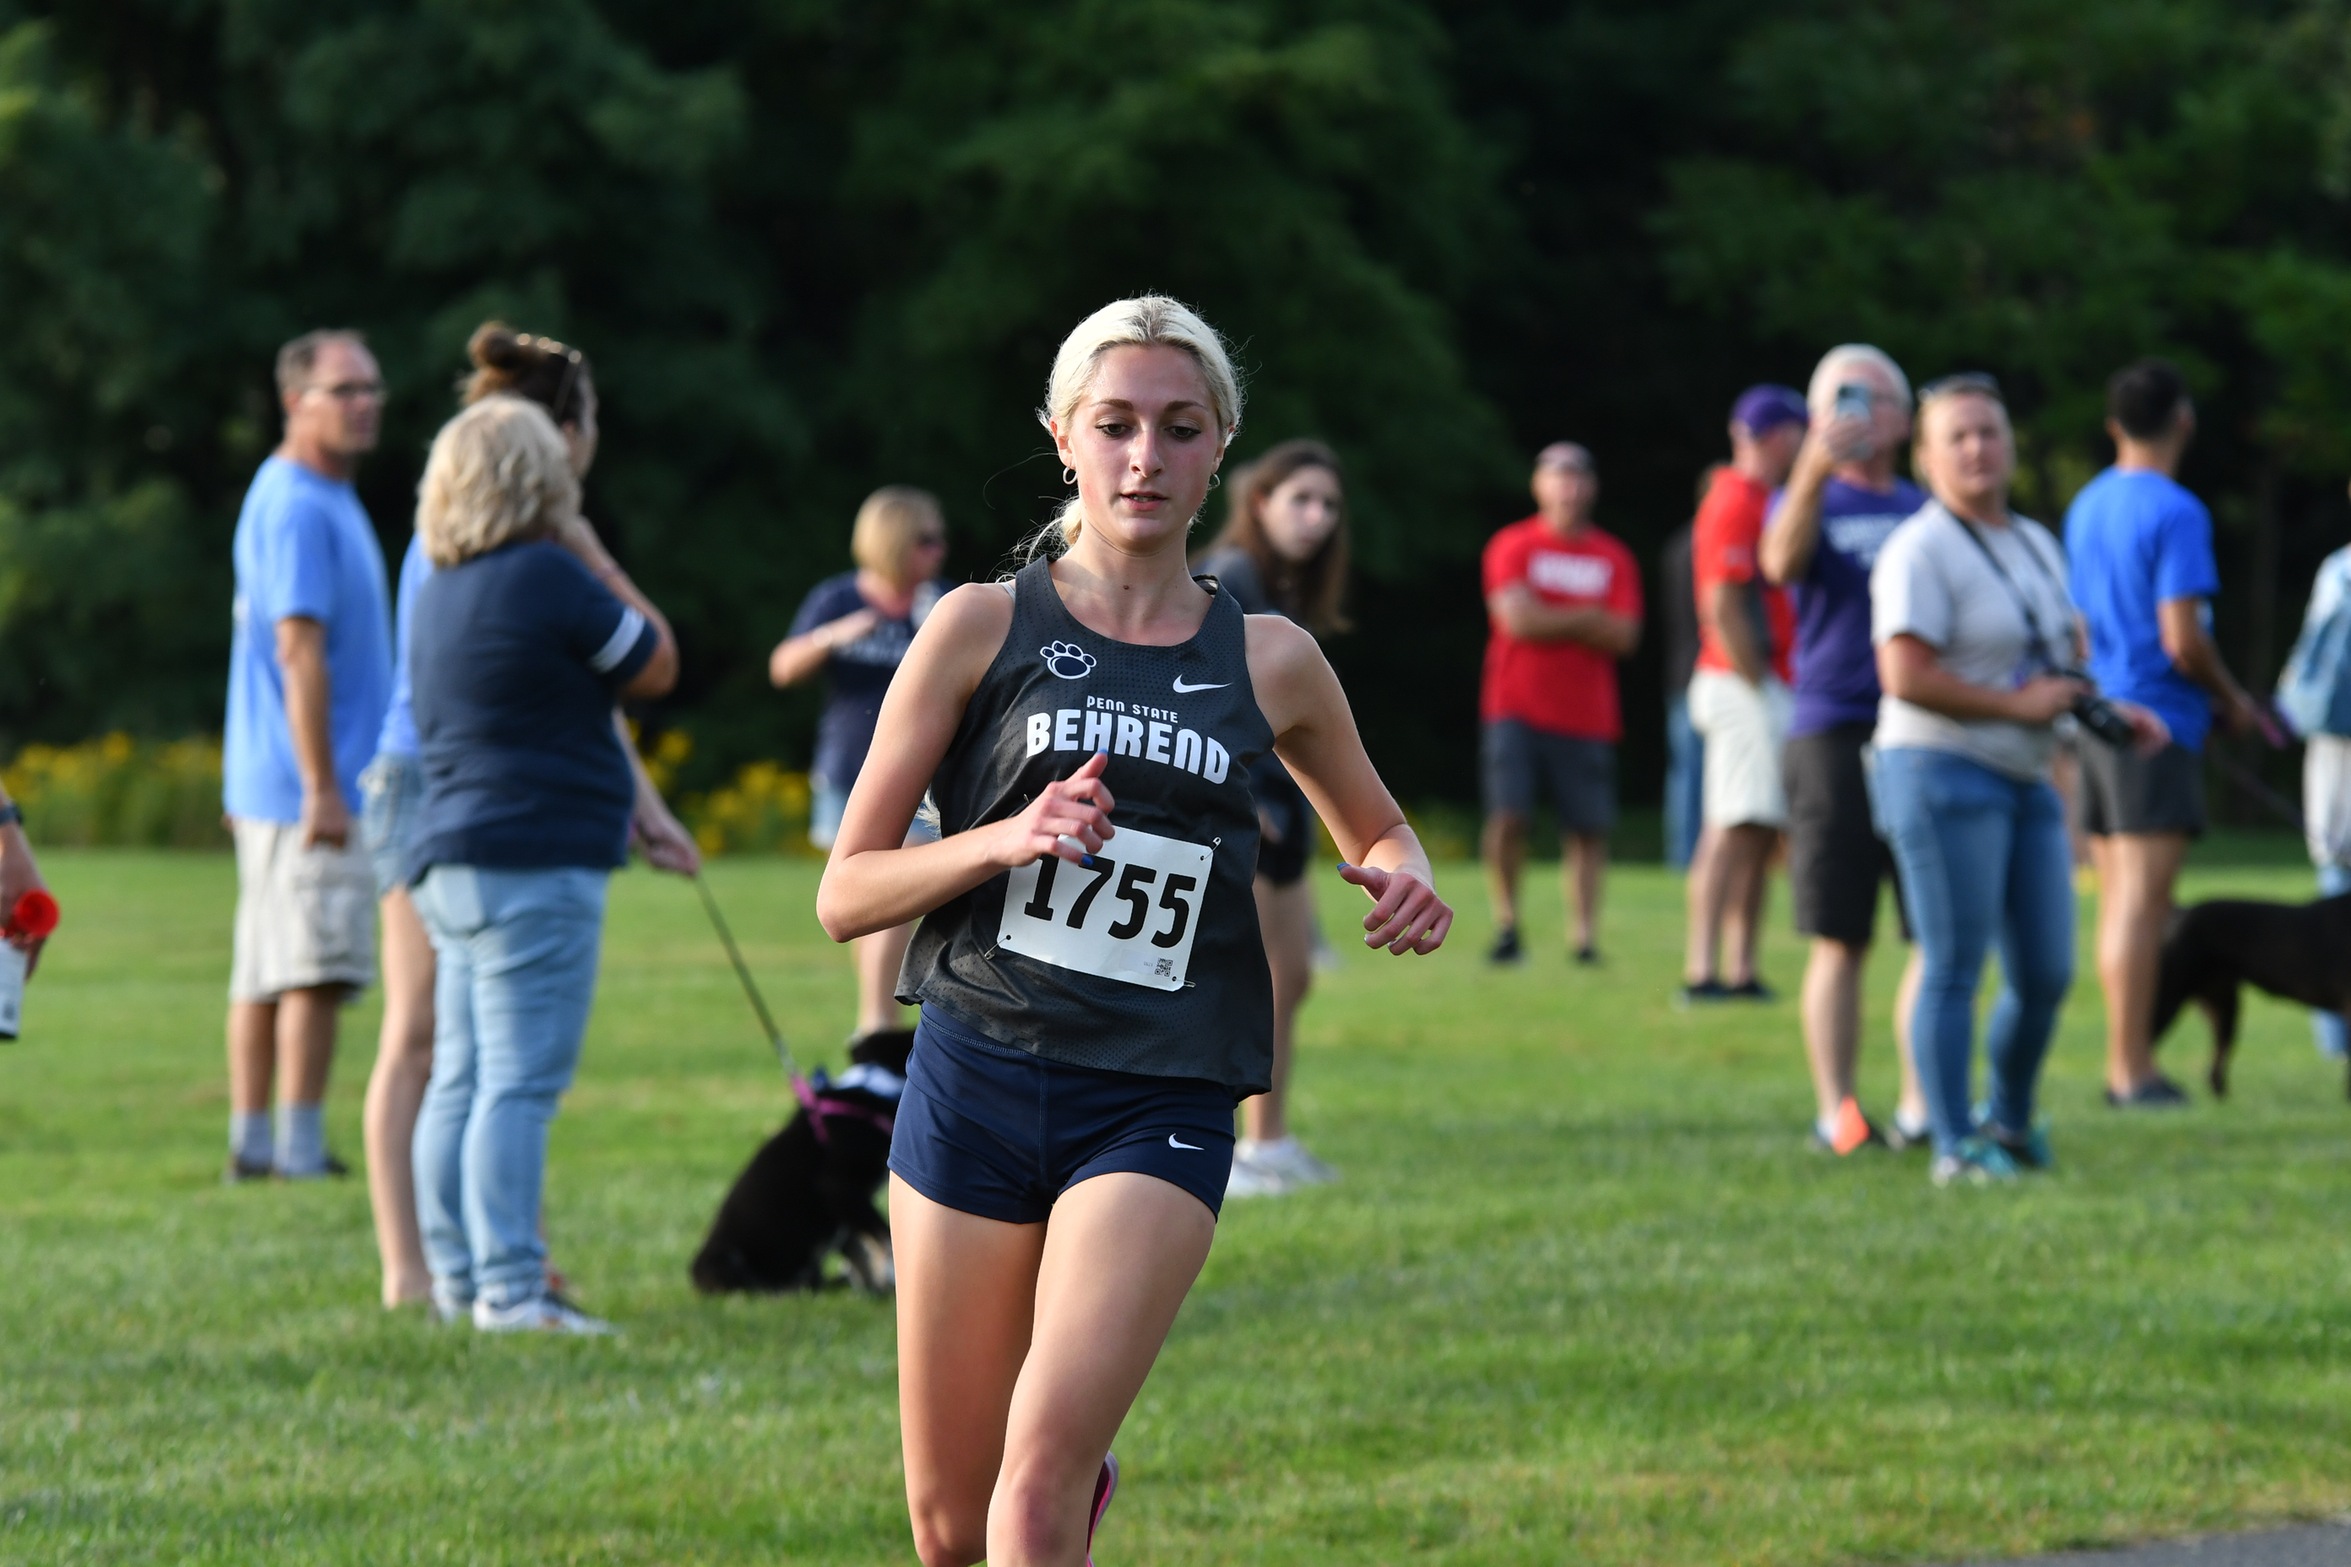 Behrend Women's Cross Country Places 18th at Inter-Regional Rumble